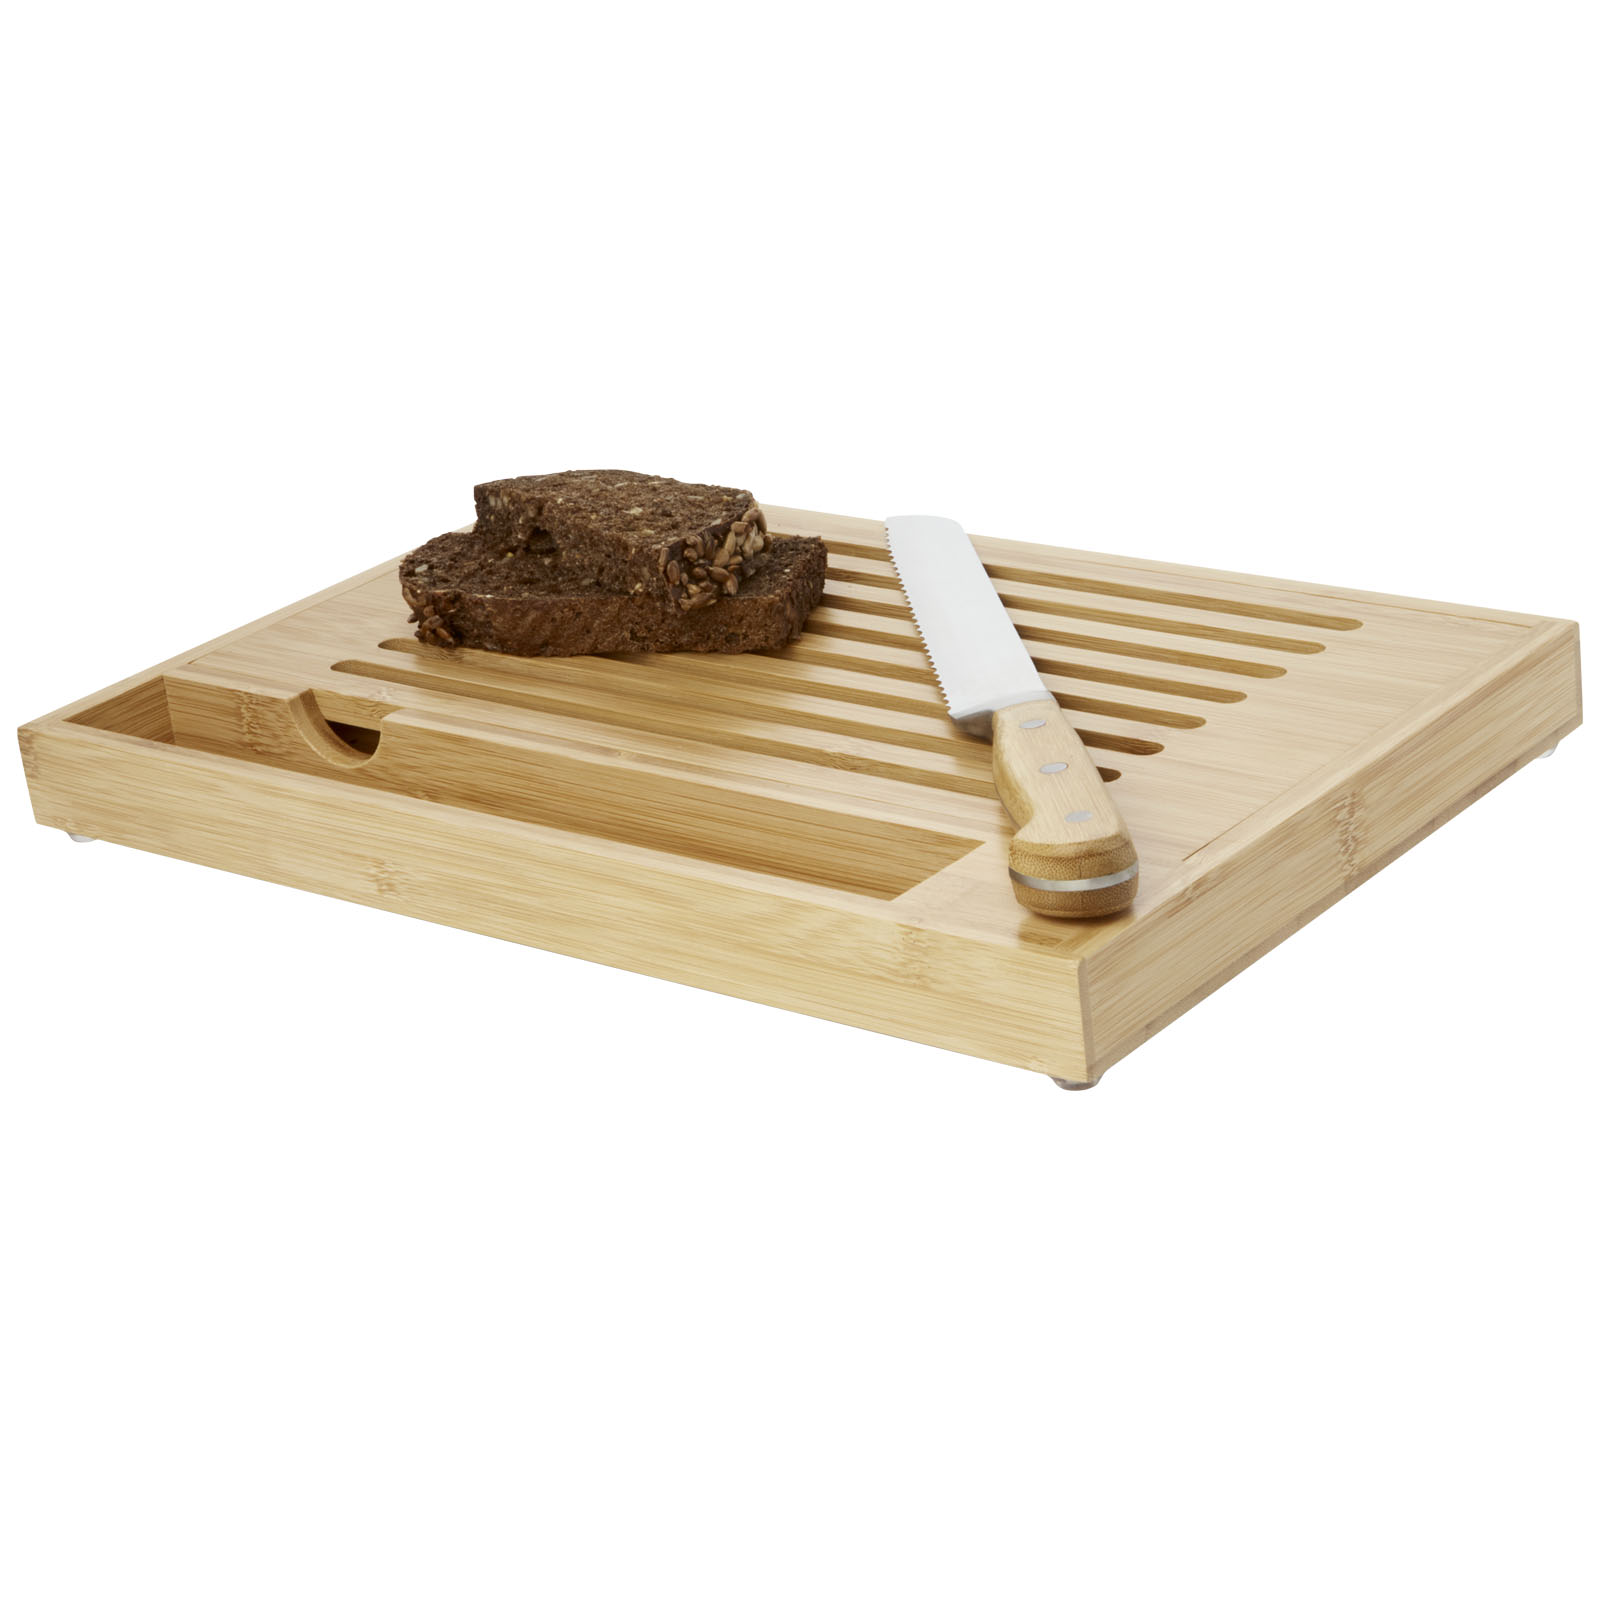 Advertising Cutting Boards - Pao bamboo cutting board with knife